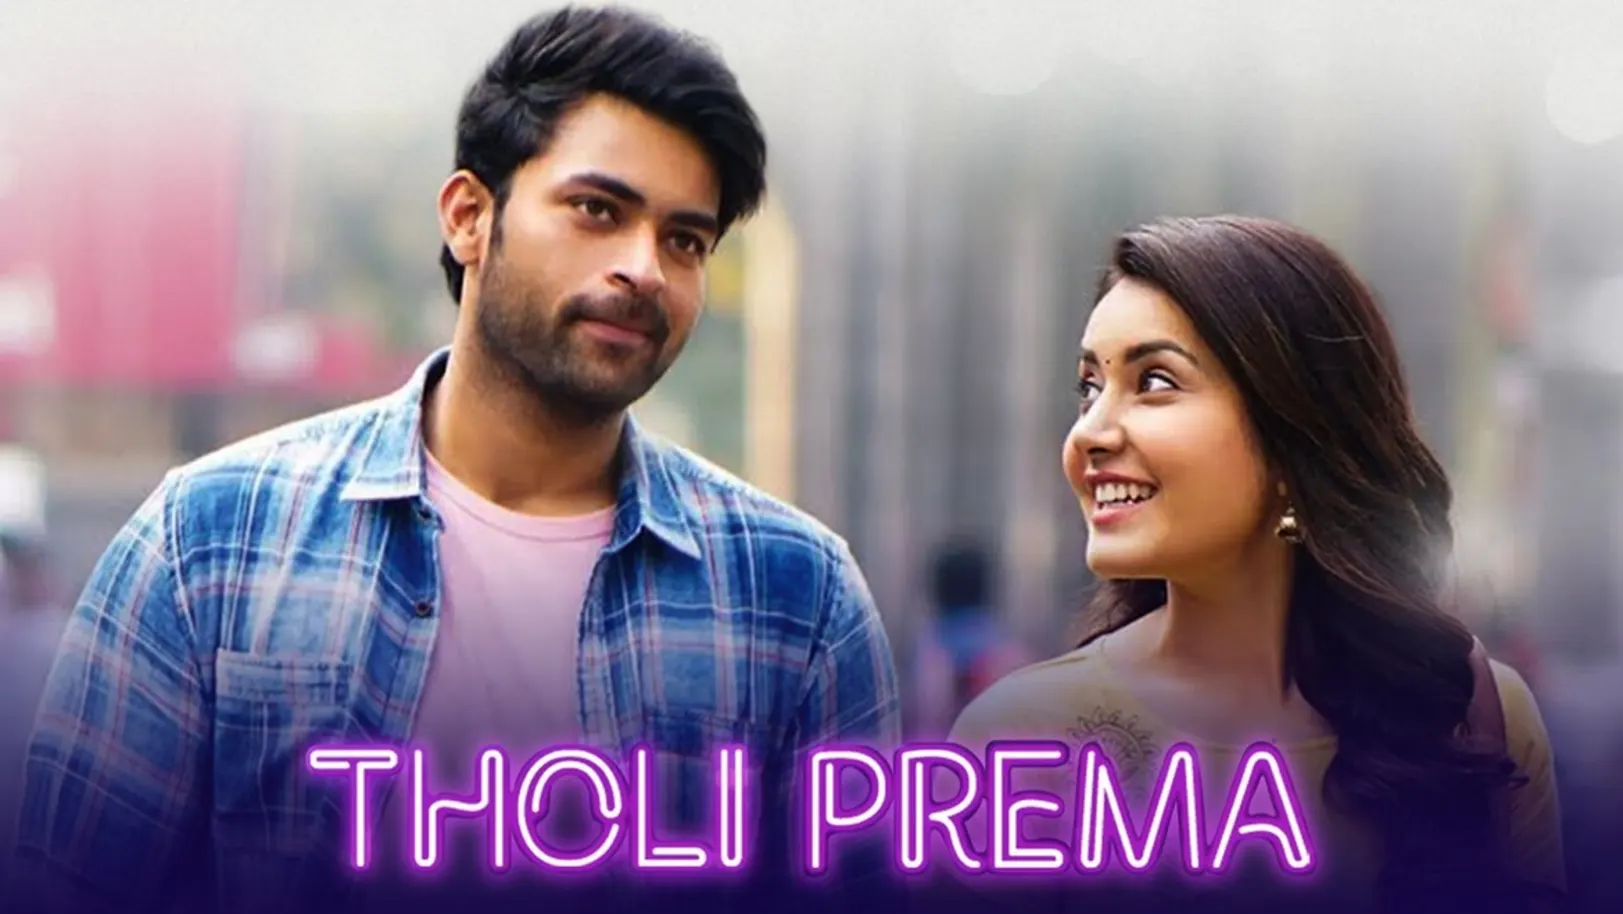 Tholi Prema Streaming Now On &Pictures